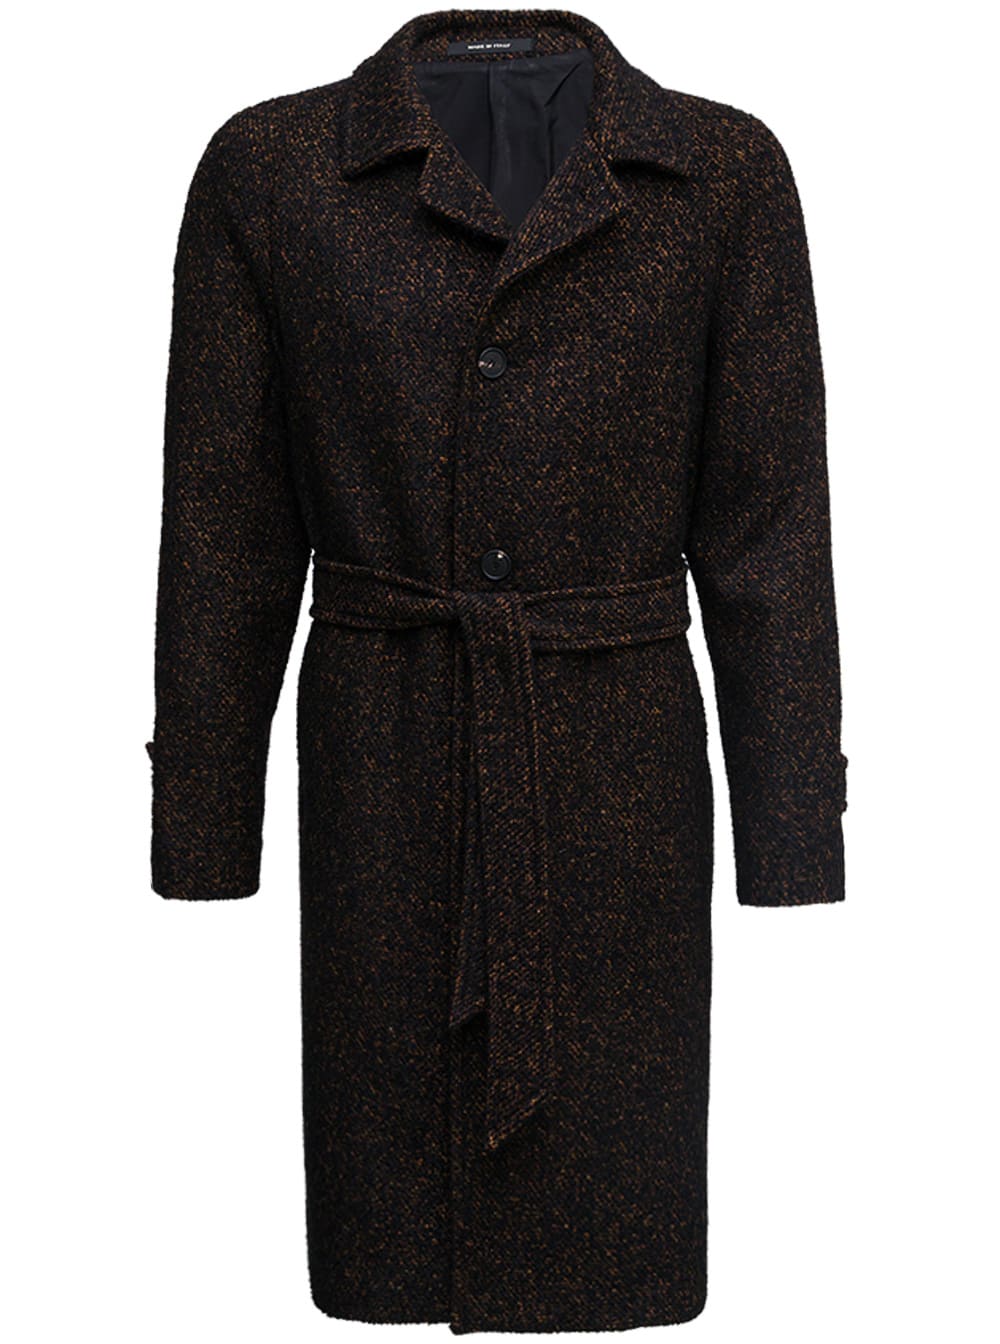 Tagliatore Brown Single Breasted Coat In Bouclet Wool With Belt